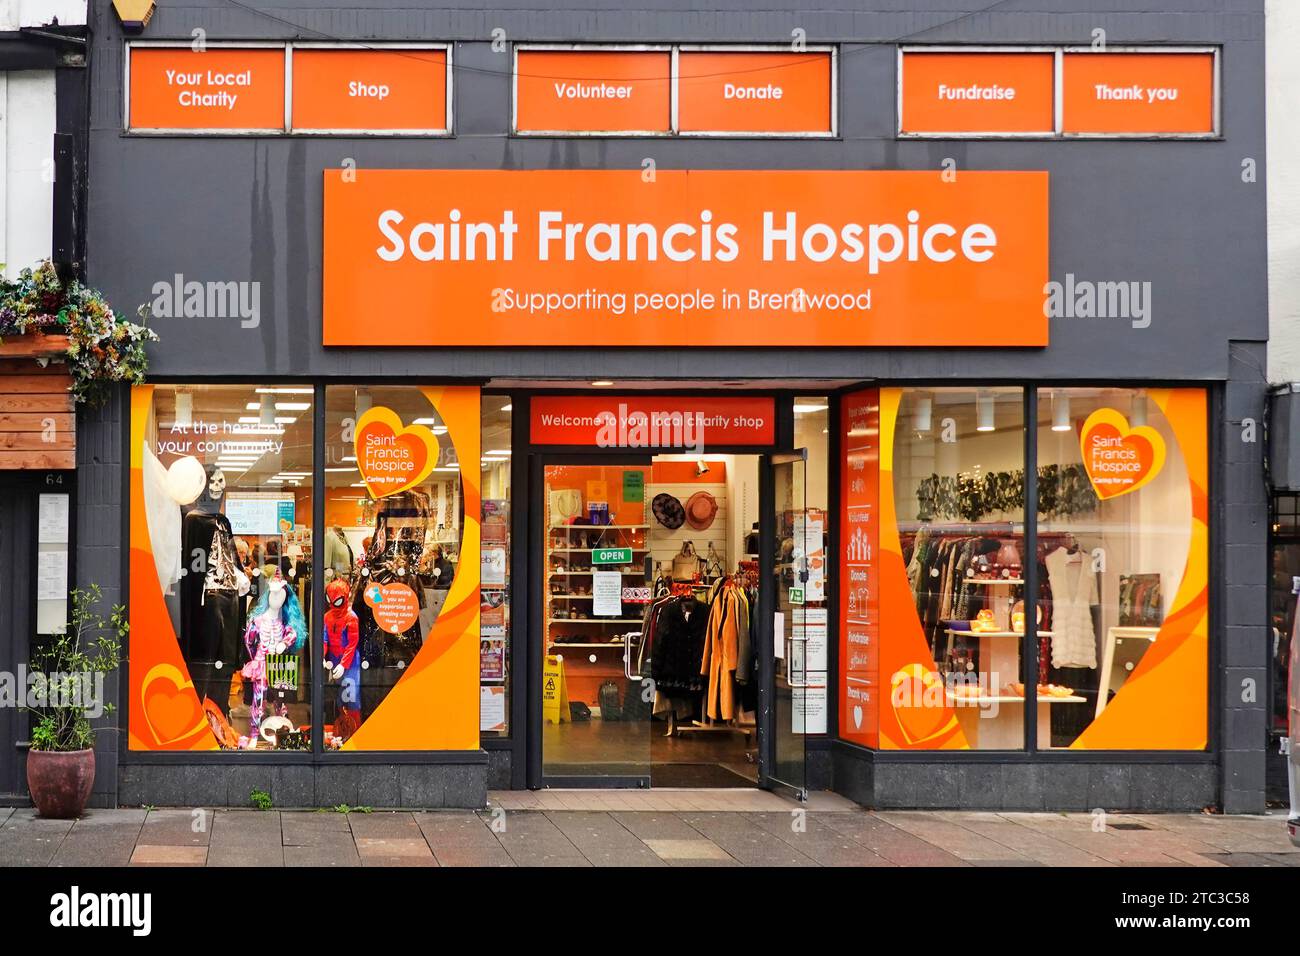 Saint Francis Hospice a charity shop front windows sells second-hand merchandise fundraising for palliative care for people in Brentwood Essex UK Stock Photo